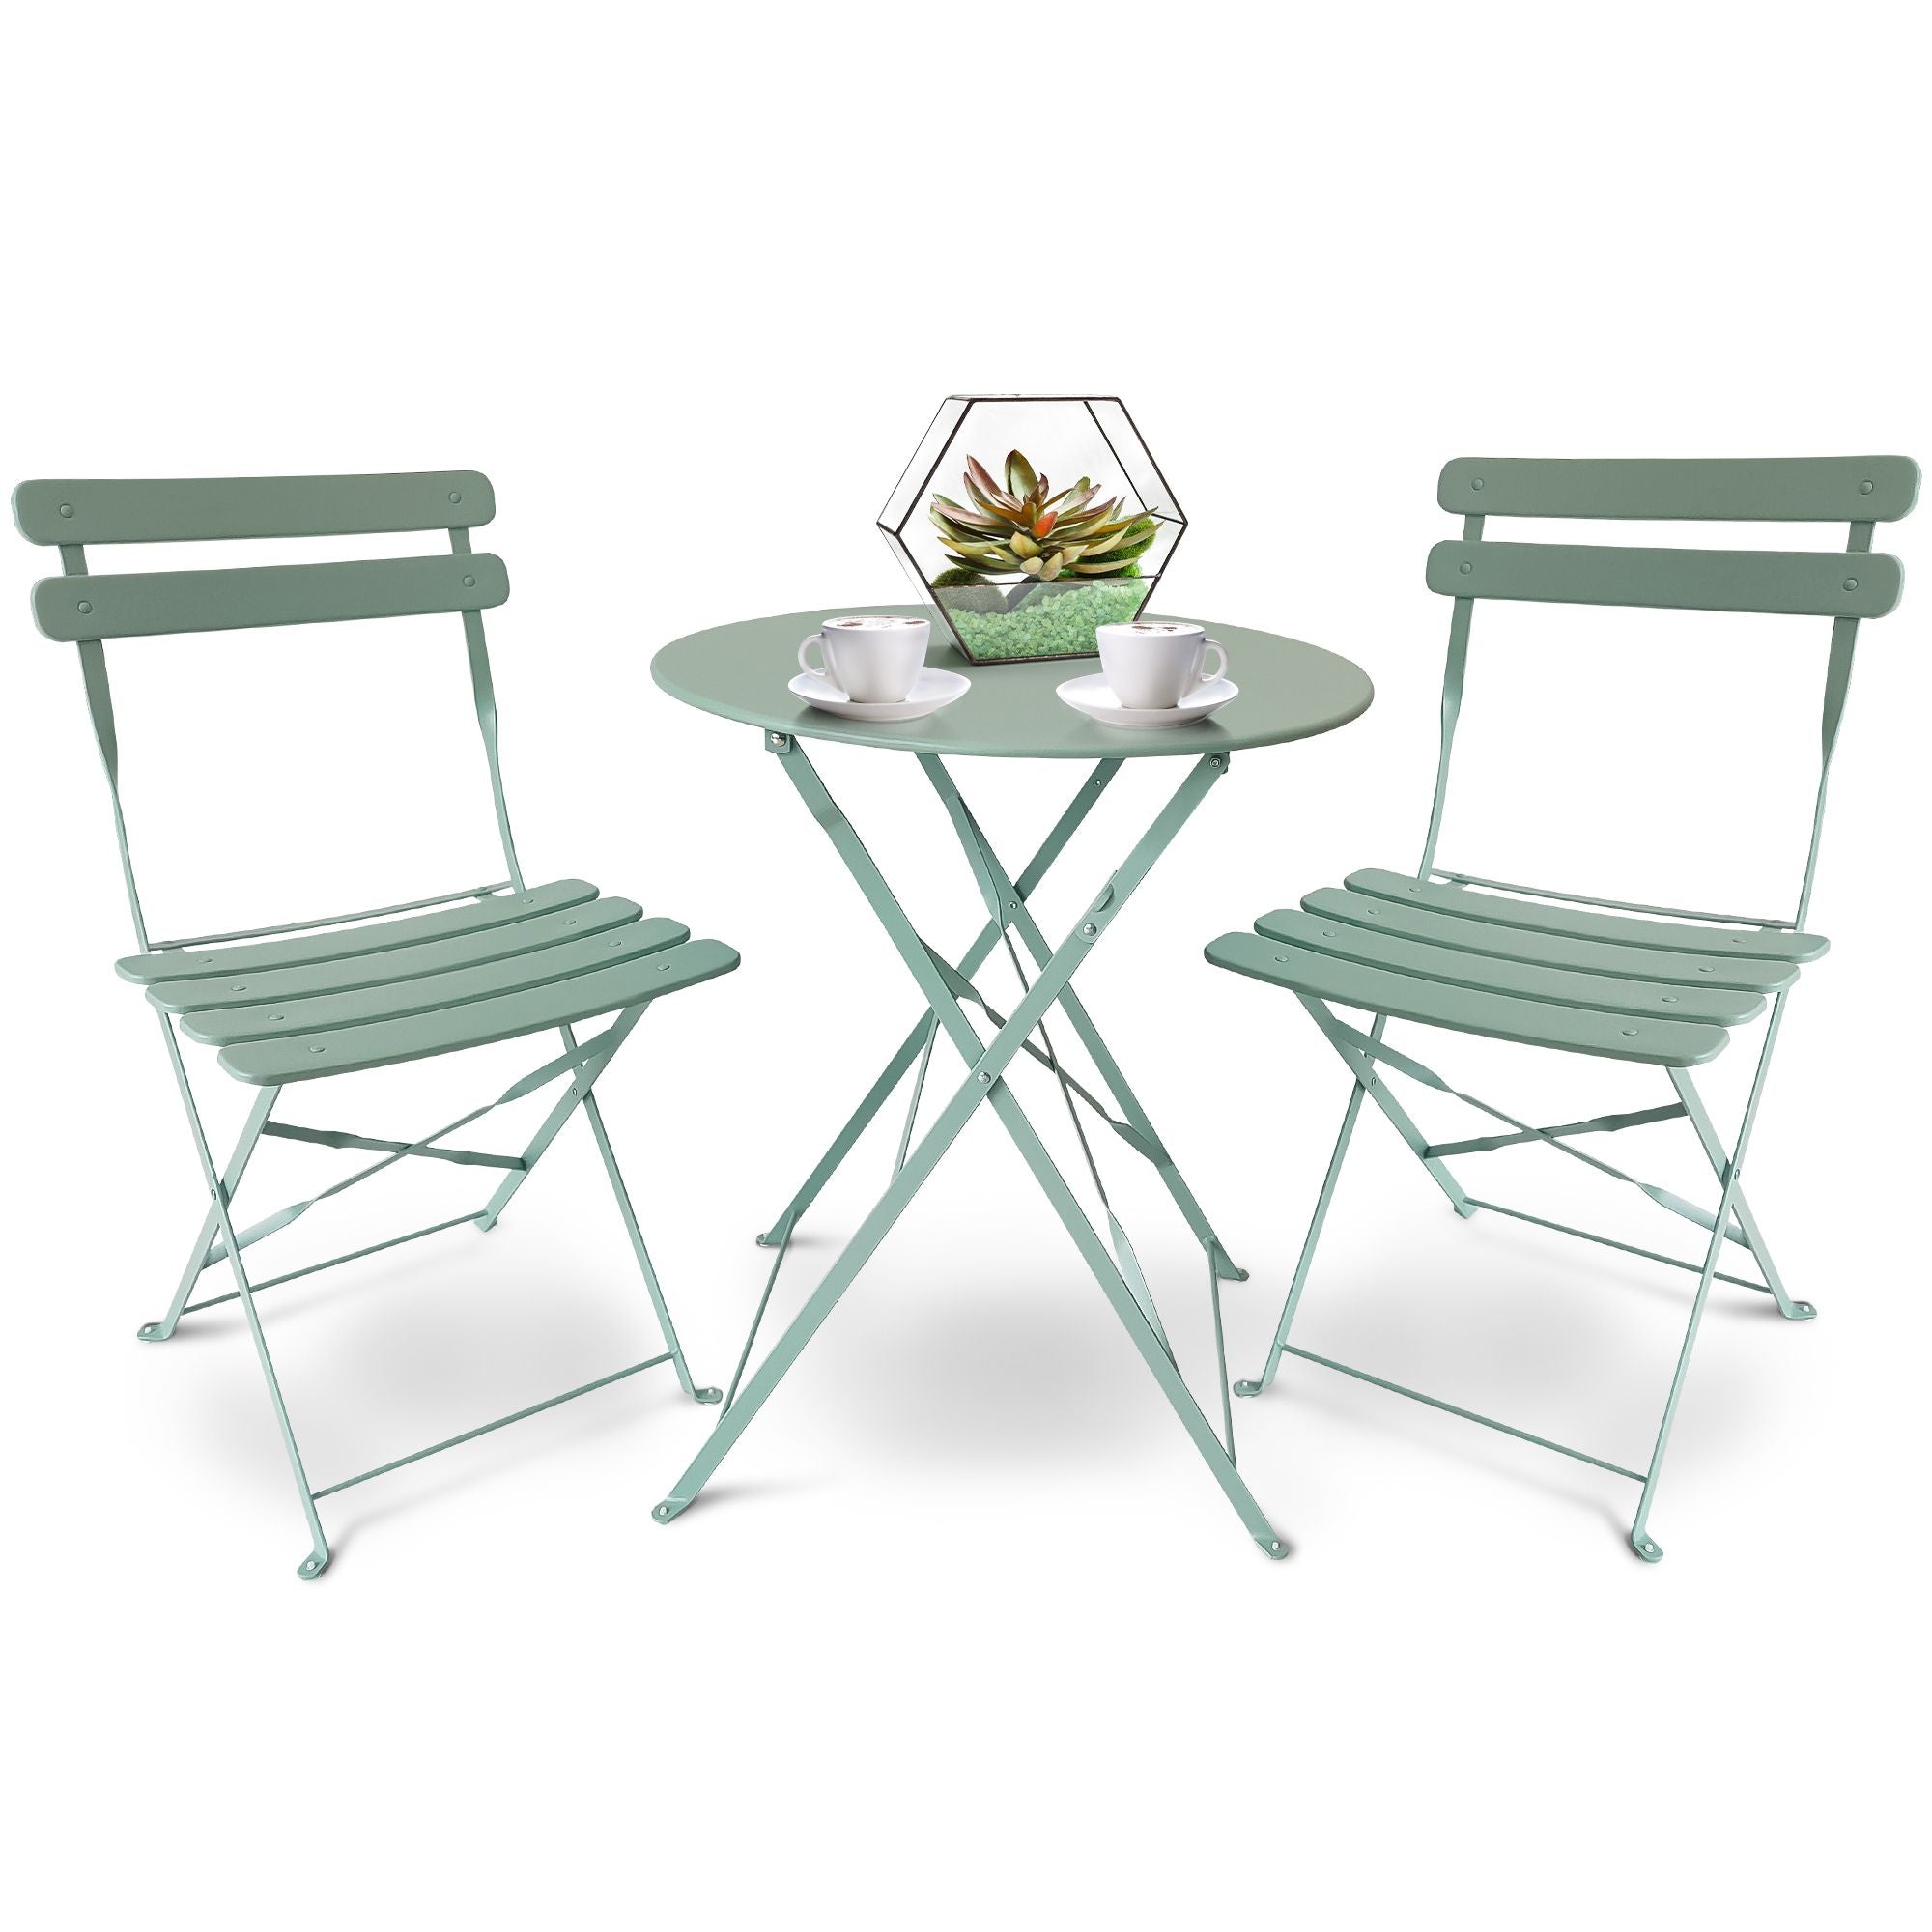 SUNMER Bistro Table & Chairs Set - Mint